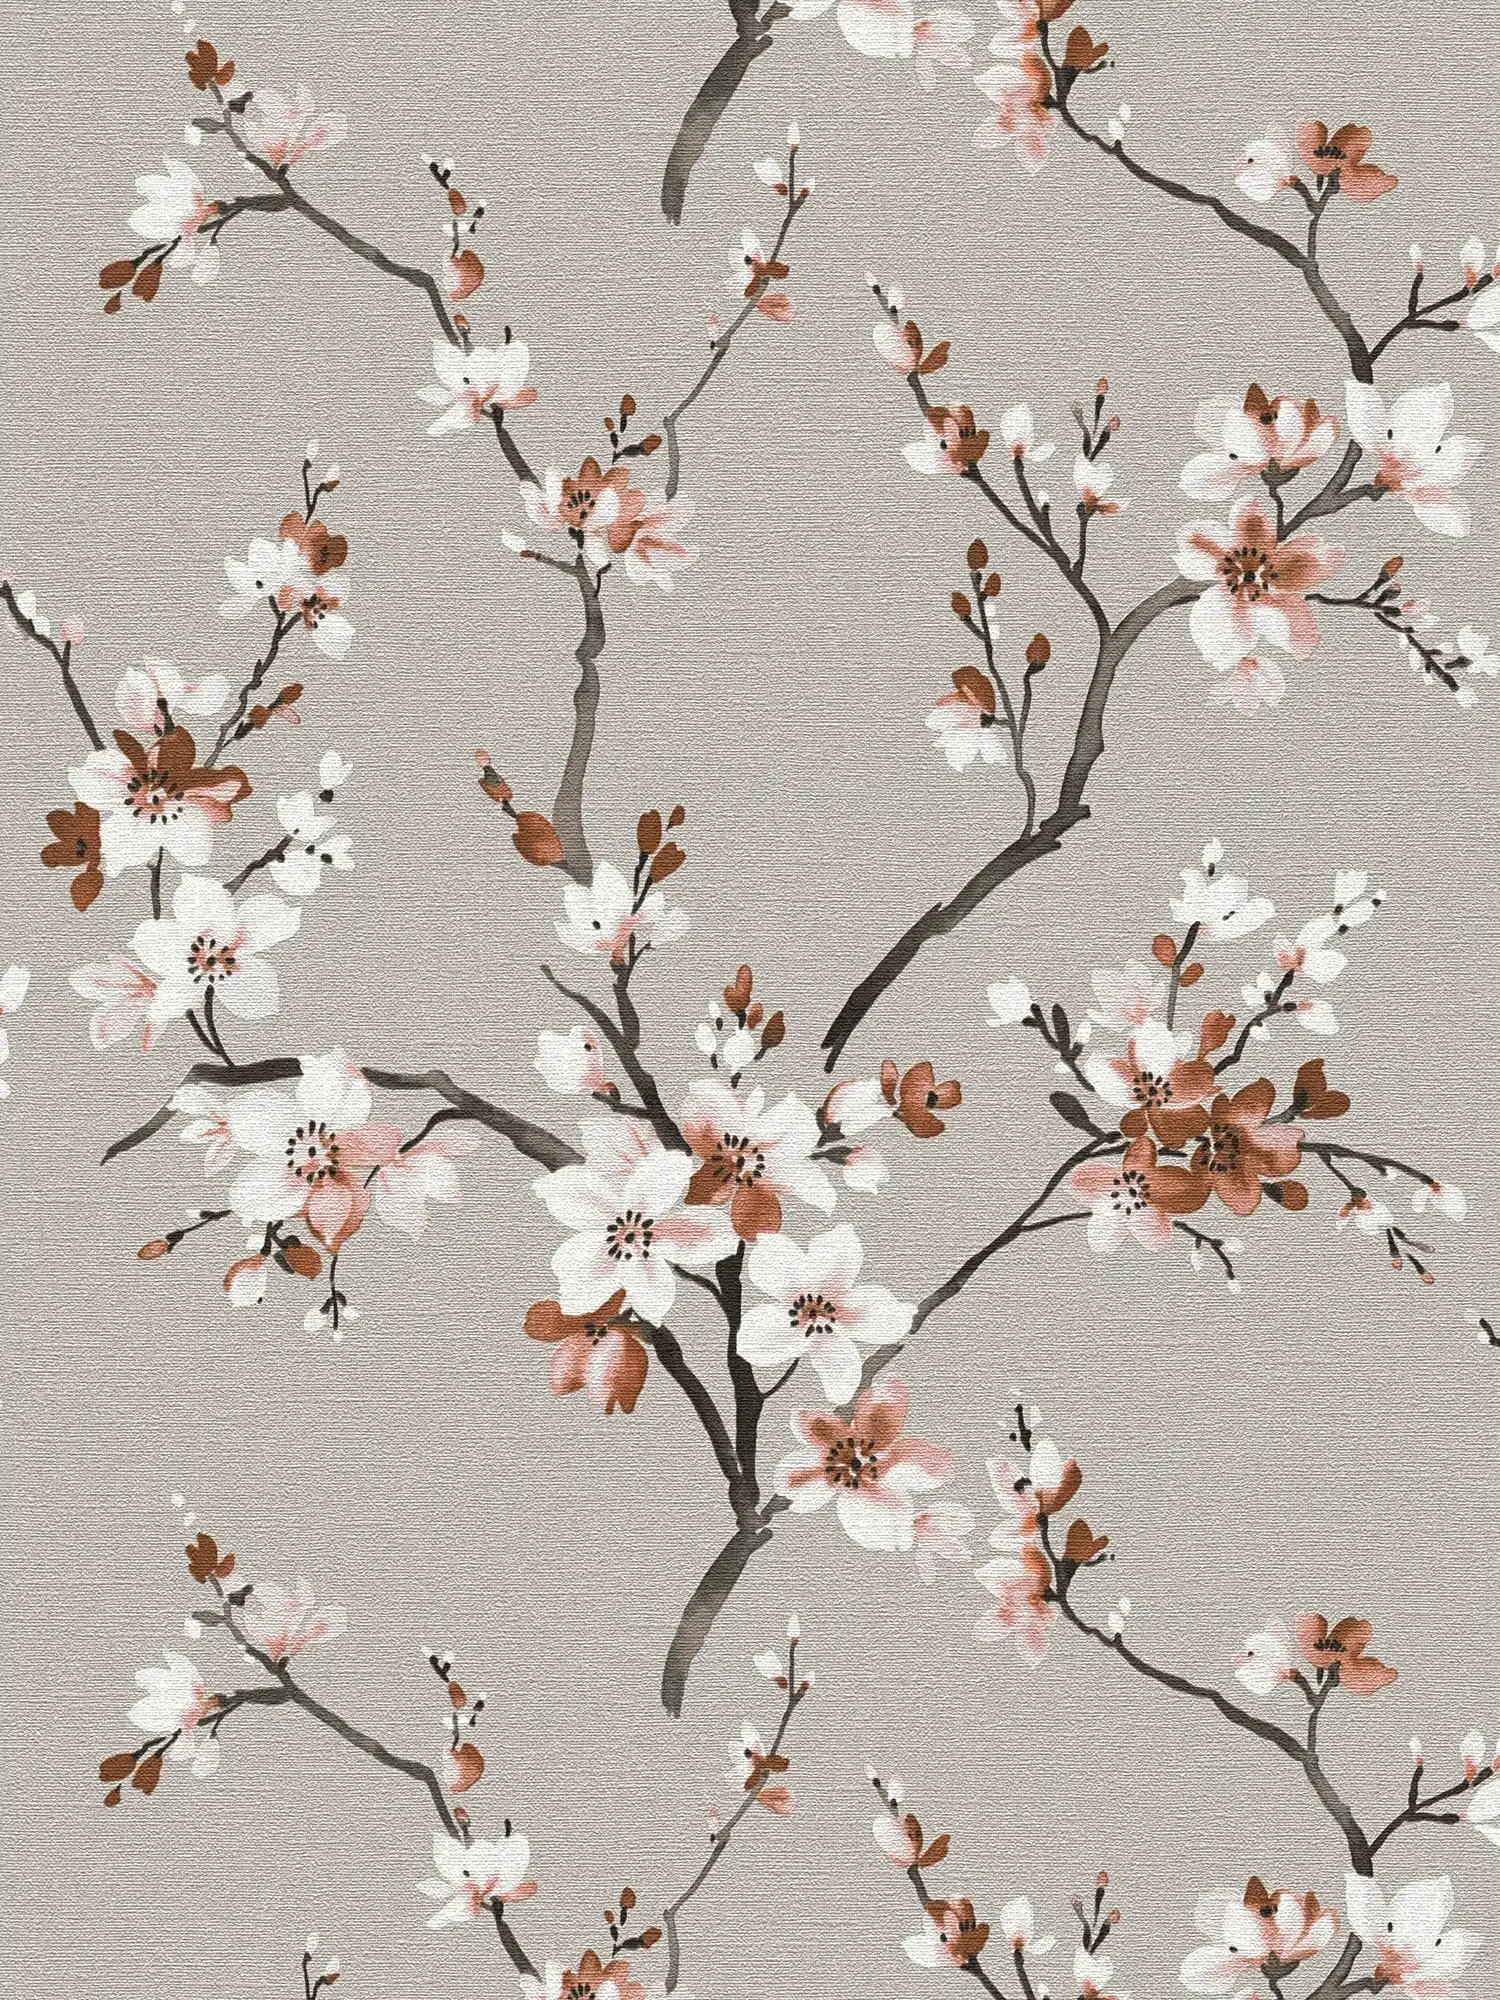 Floral wallpaper grey with brown watercolour flowers
